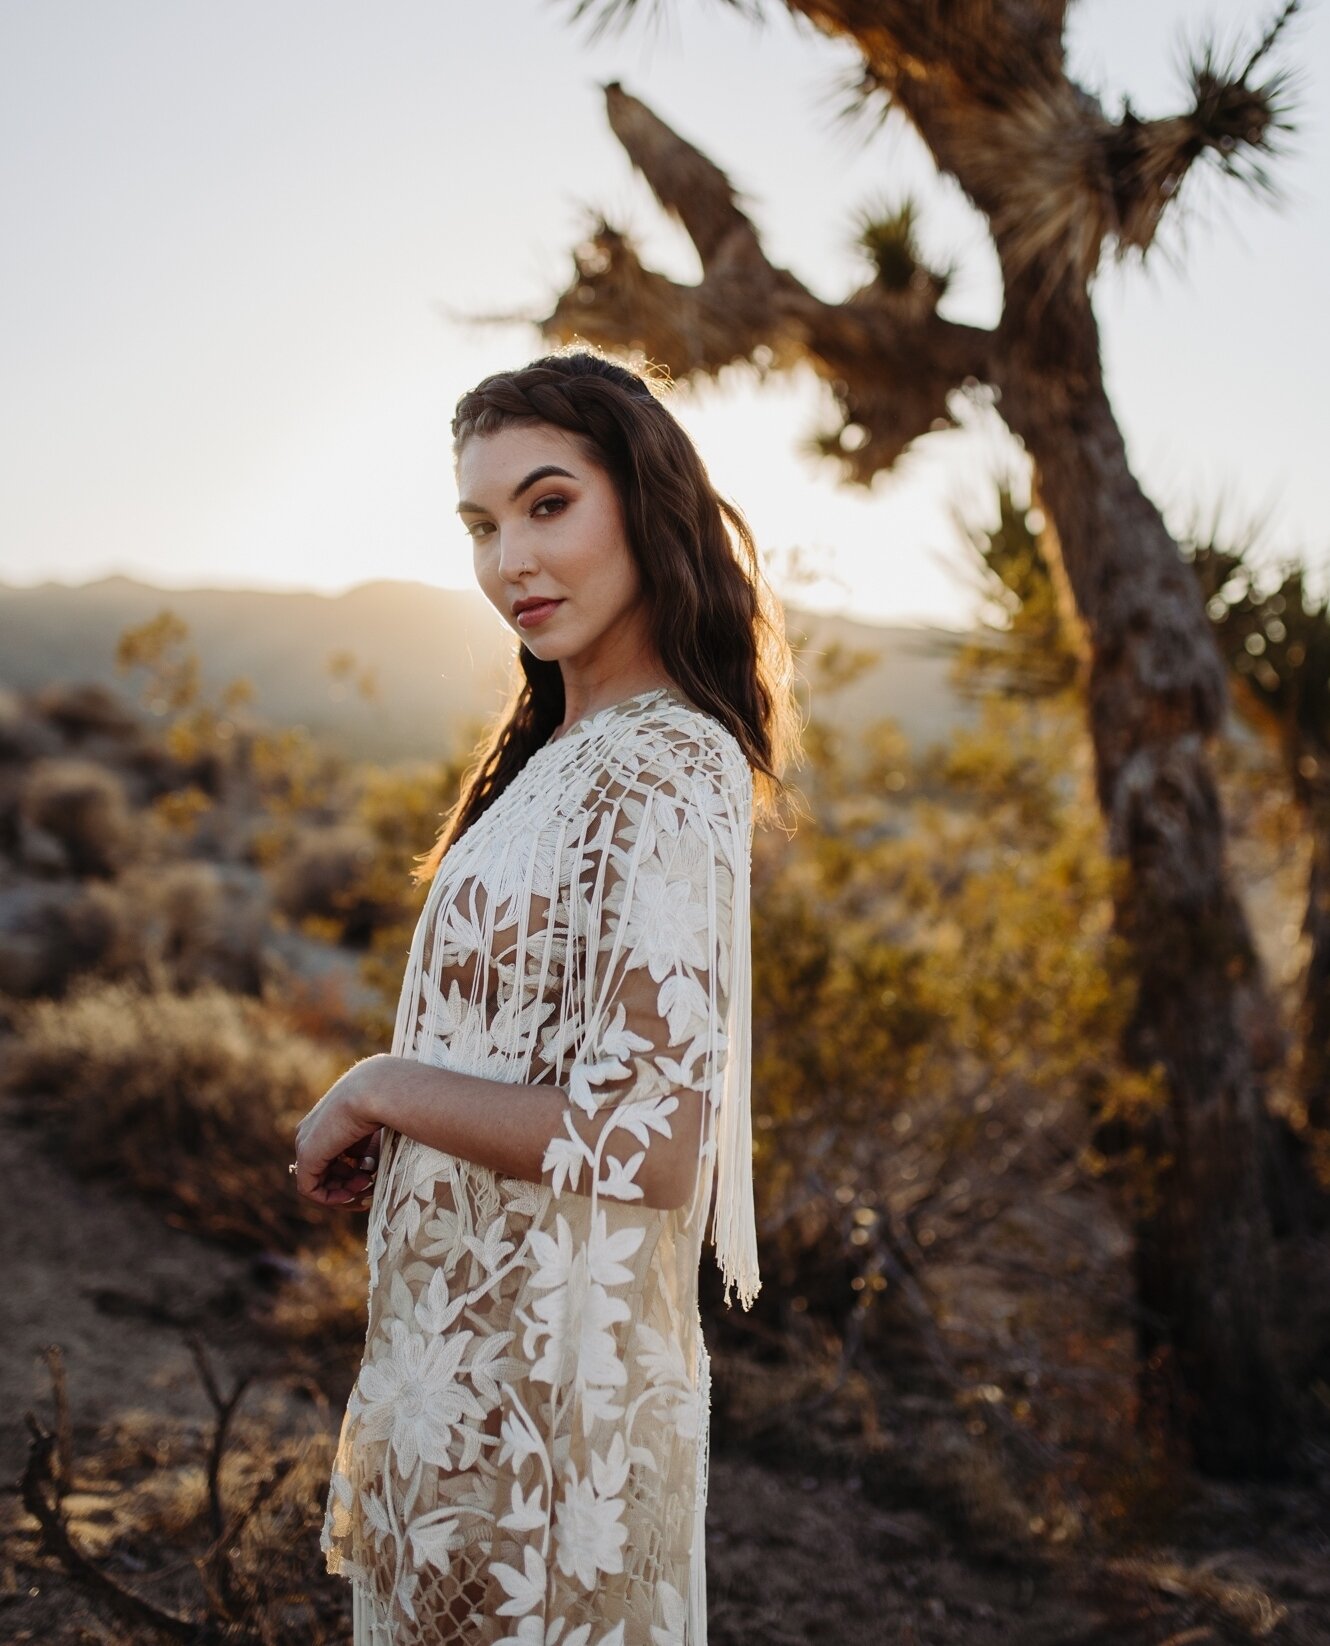 Bridal portraits in the desert. Maybe in your heart you would love to have an intimate adventurous wedding, but you don't know how to make it work. That doesn't mean it's out of reach! It's actually a lot simpler than you may think, especially with t